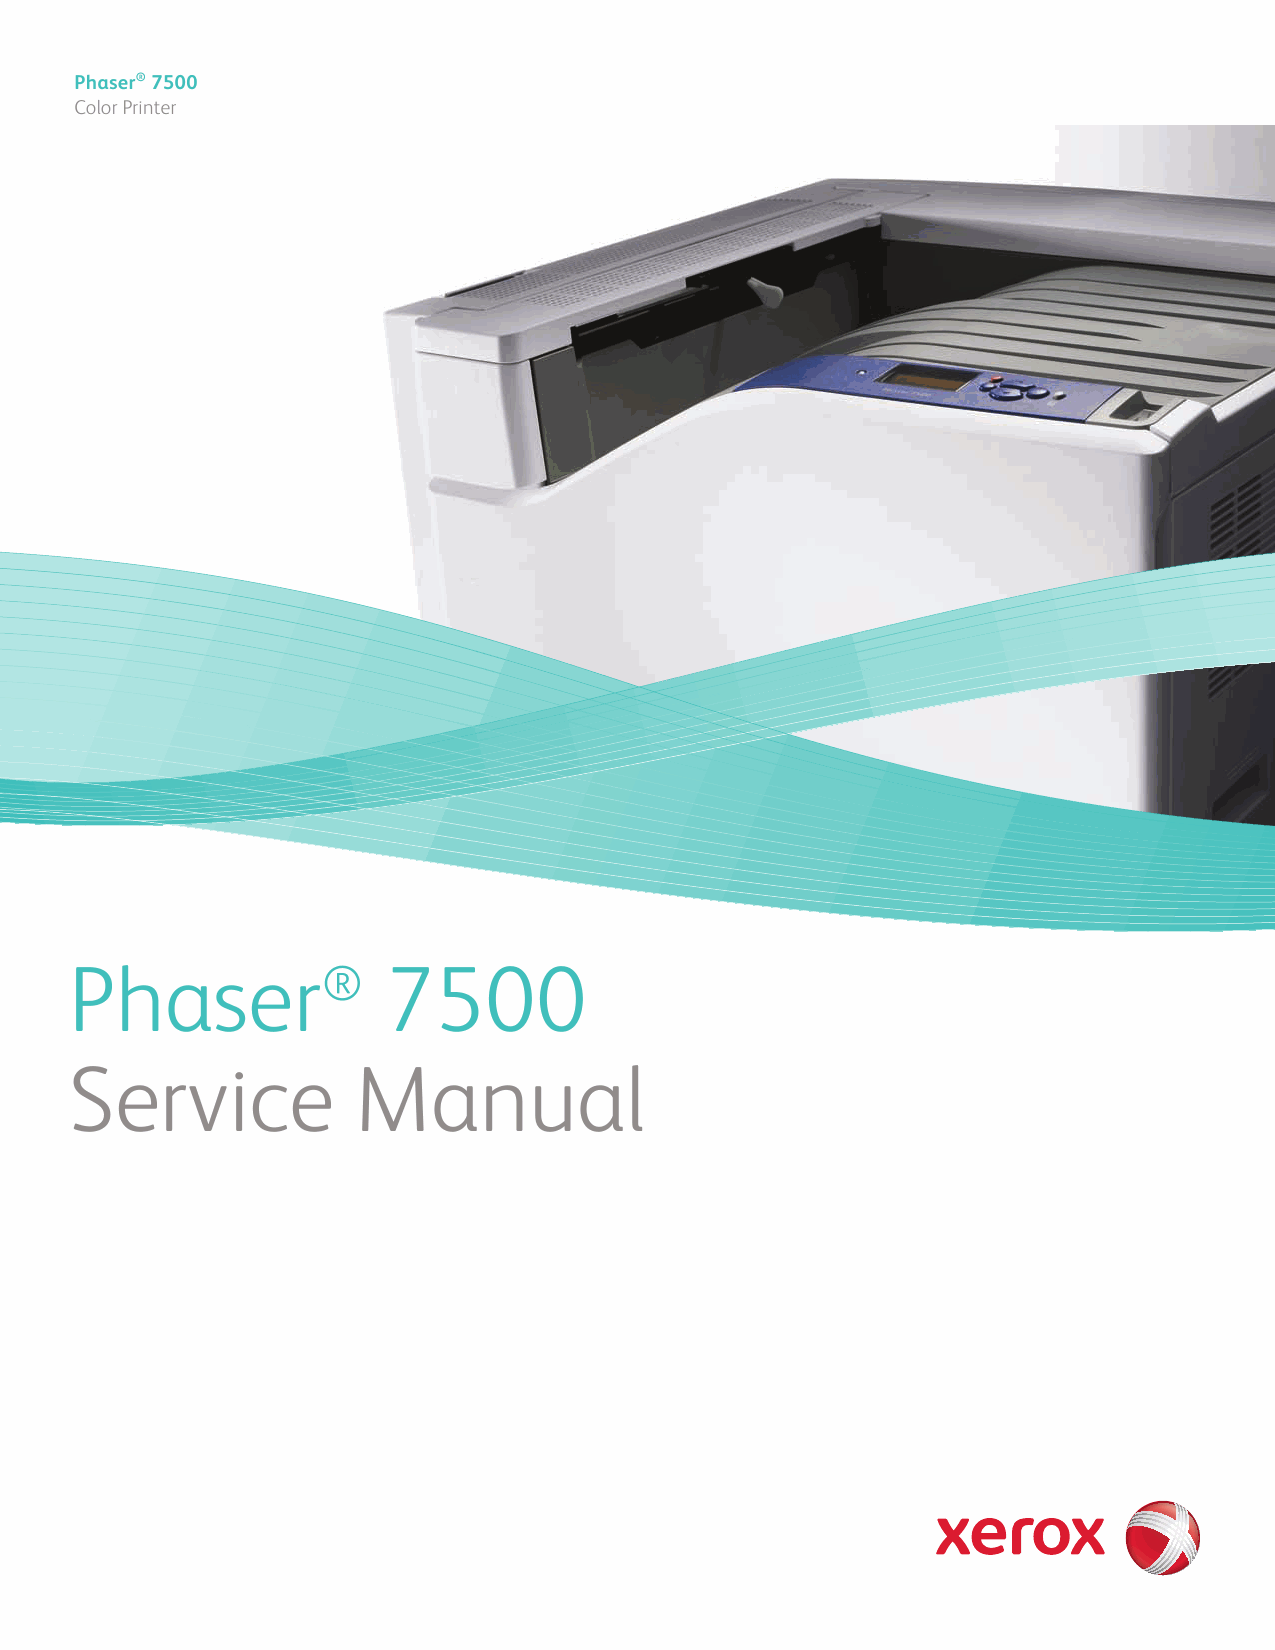 Xerox Phaser 7500 Parts List and Service Manual-1